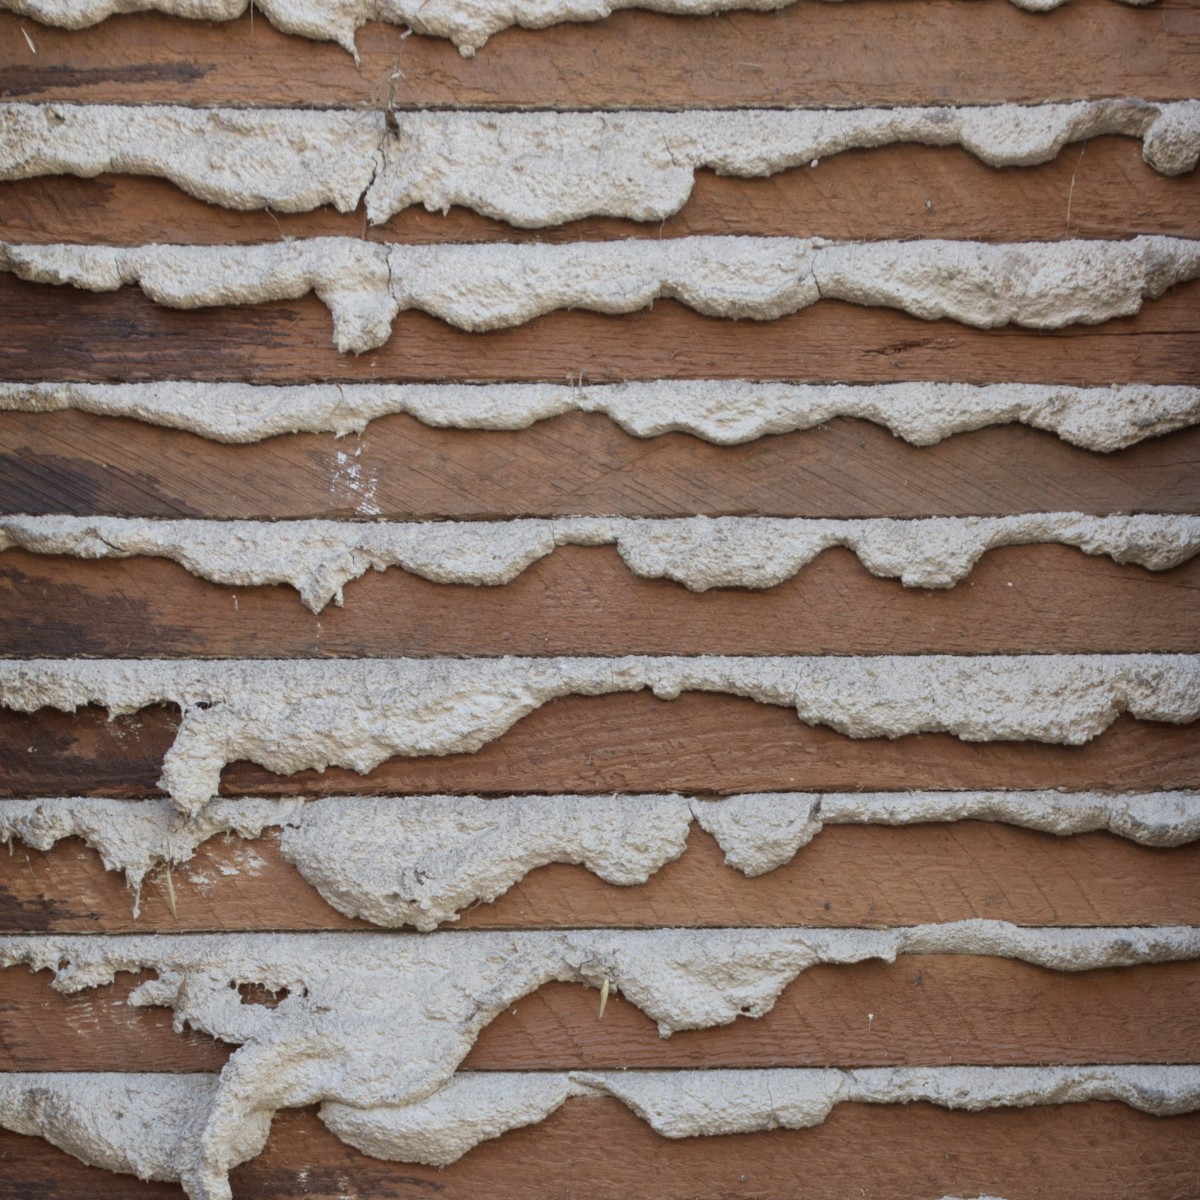 Should you keep lath and plaster or replace with modern plasterboard?